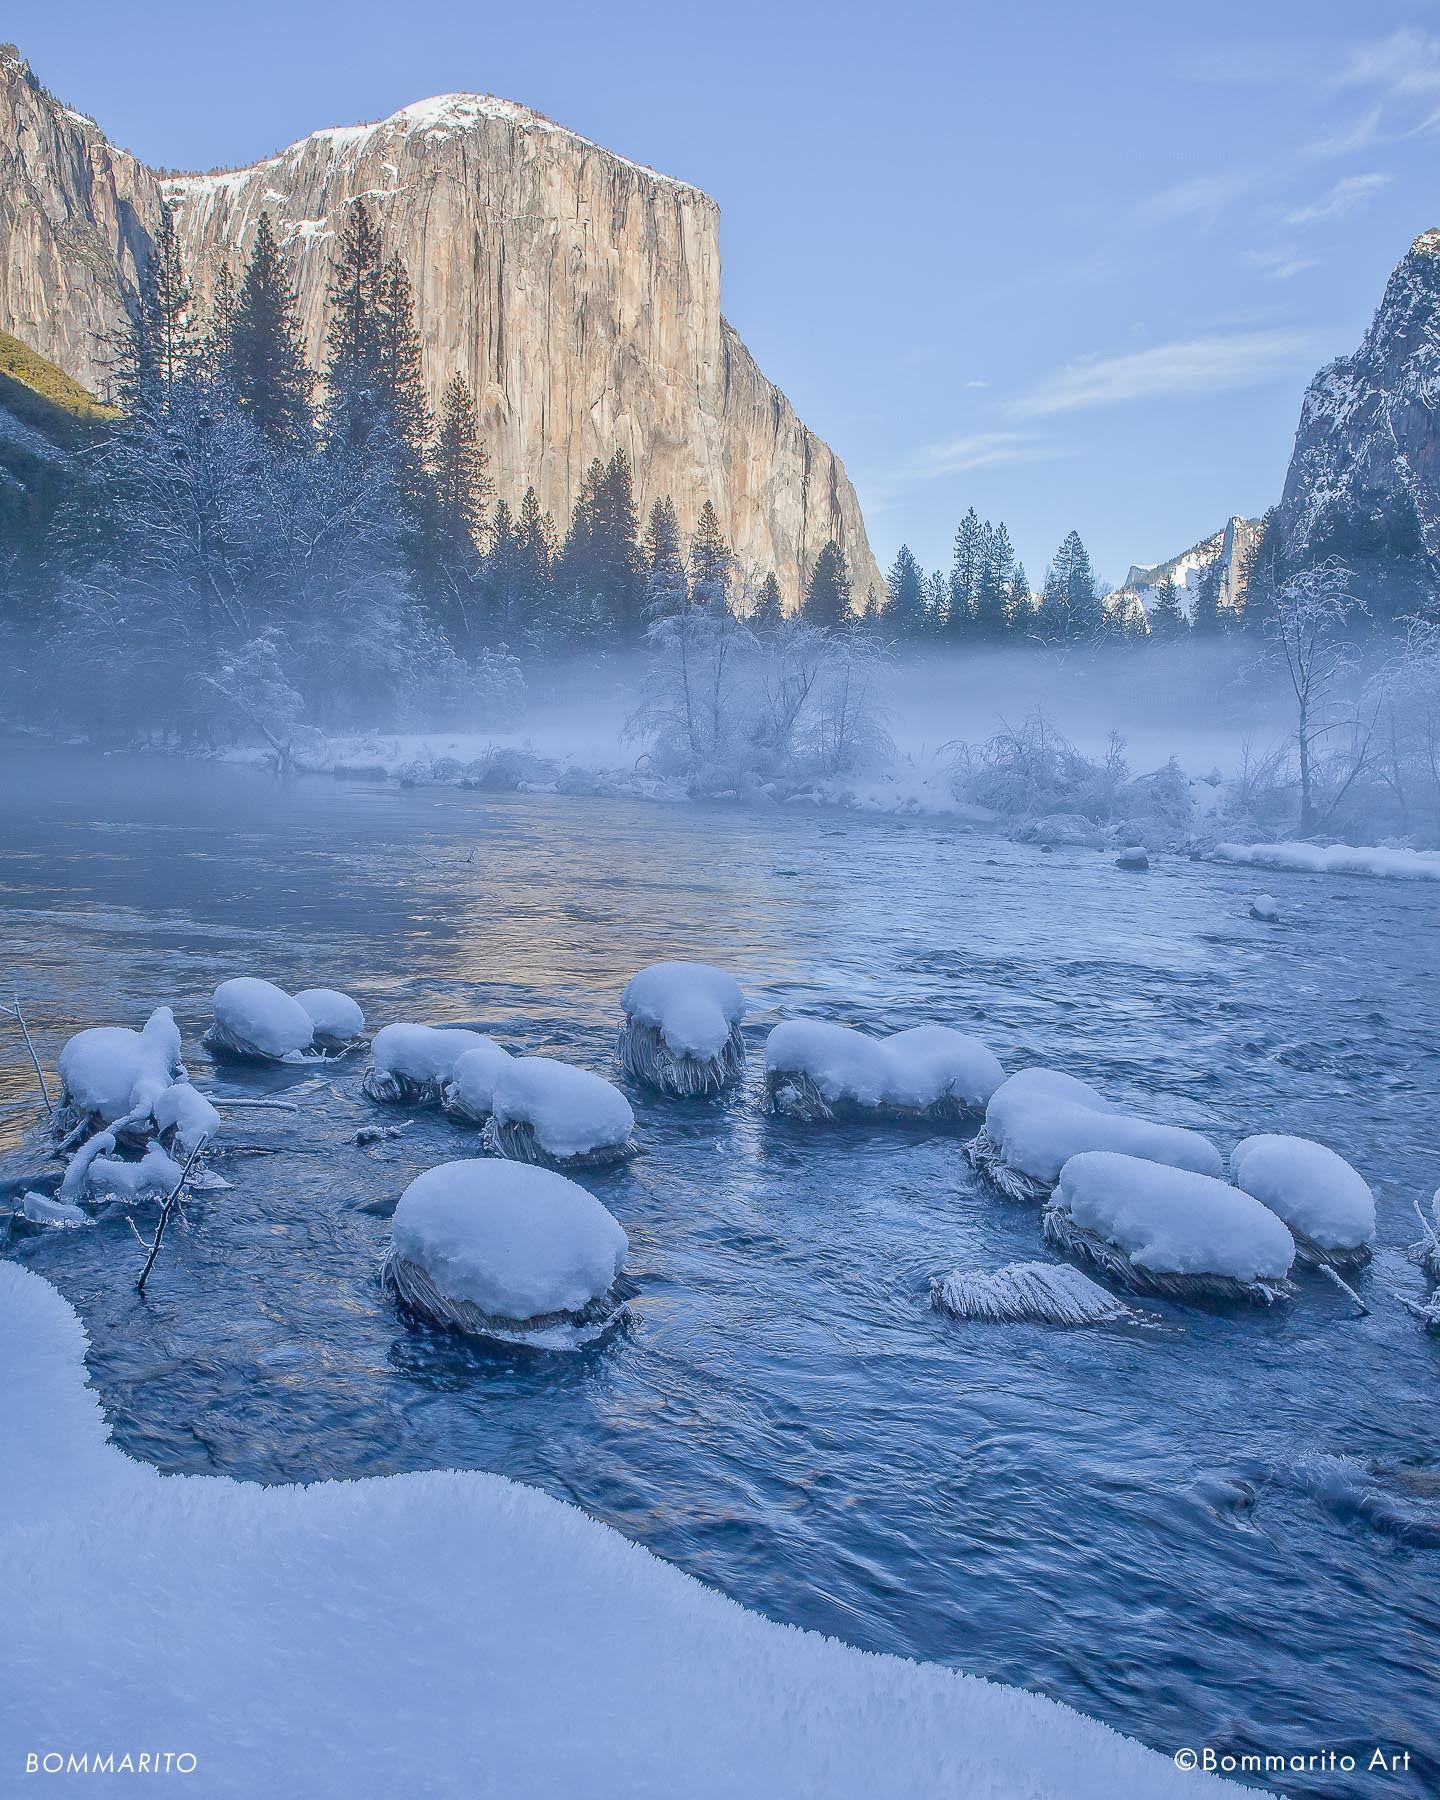 Snow on the Merced River